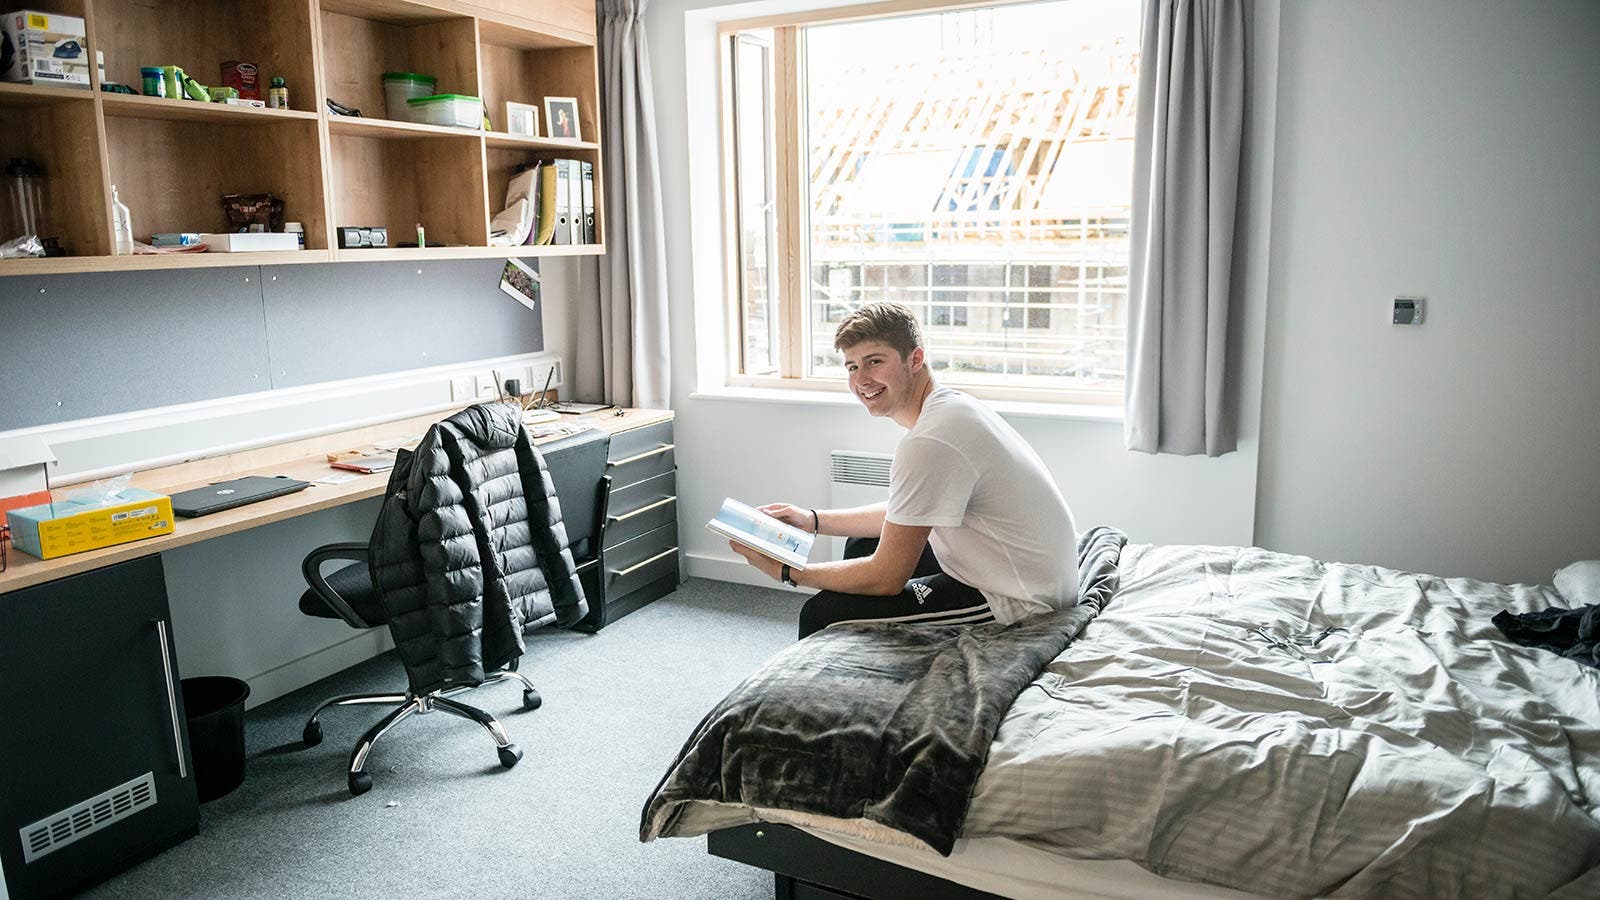 Surrey student reading on bed in accommodation